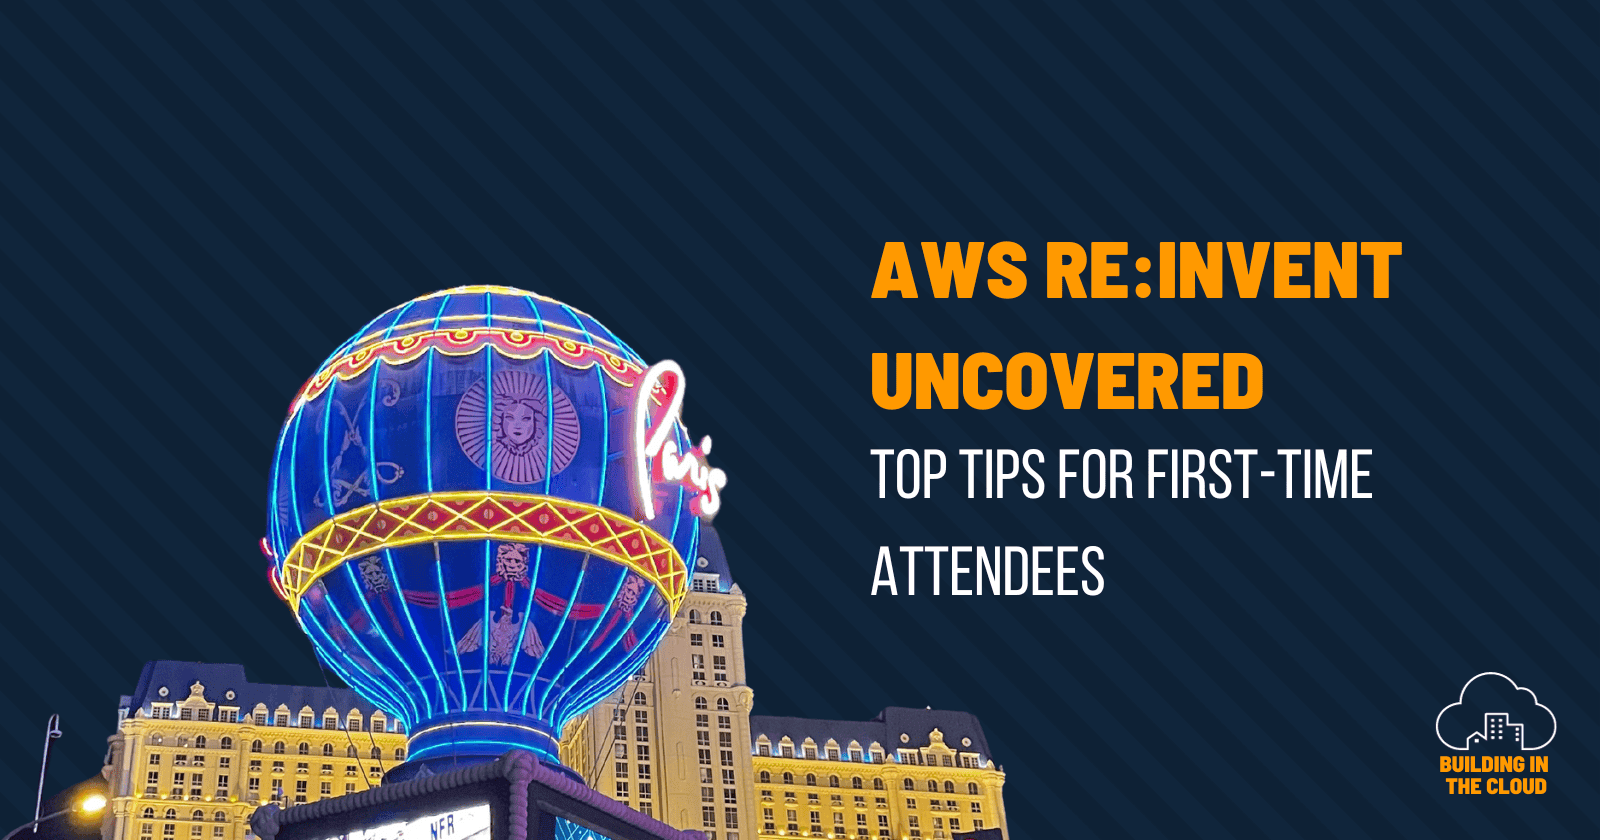 AWS re:Invent uncovered - TOP TIPS FOR FIRST-TIME ATTENDEES